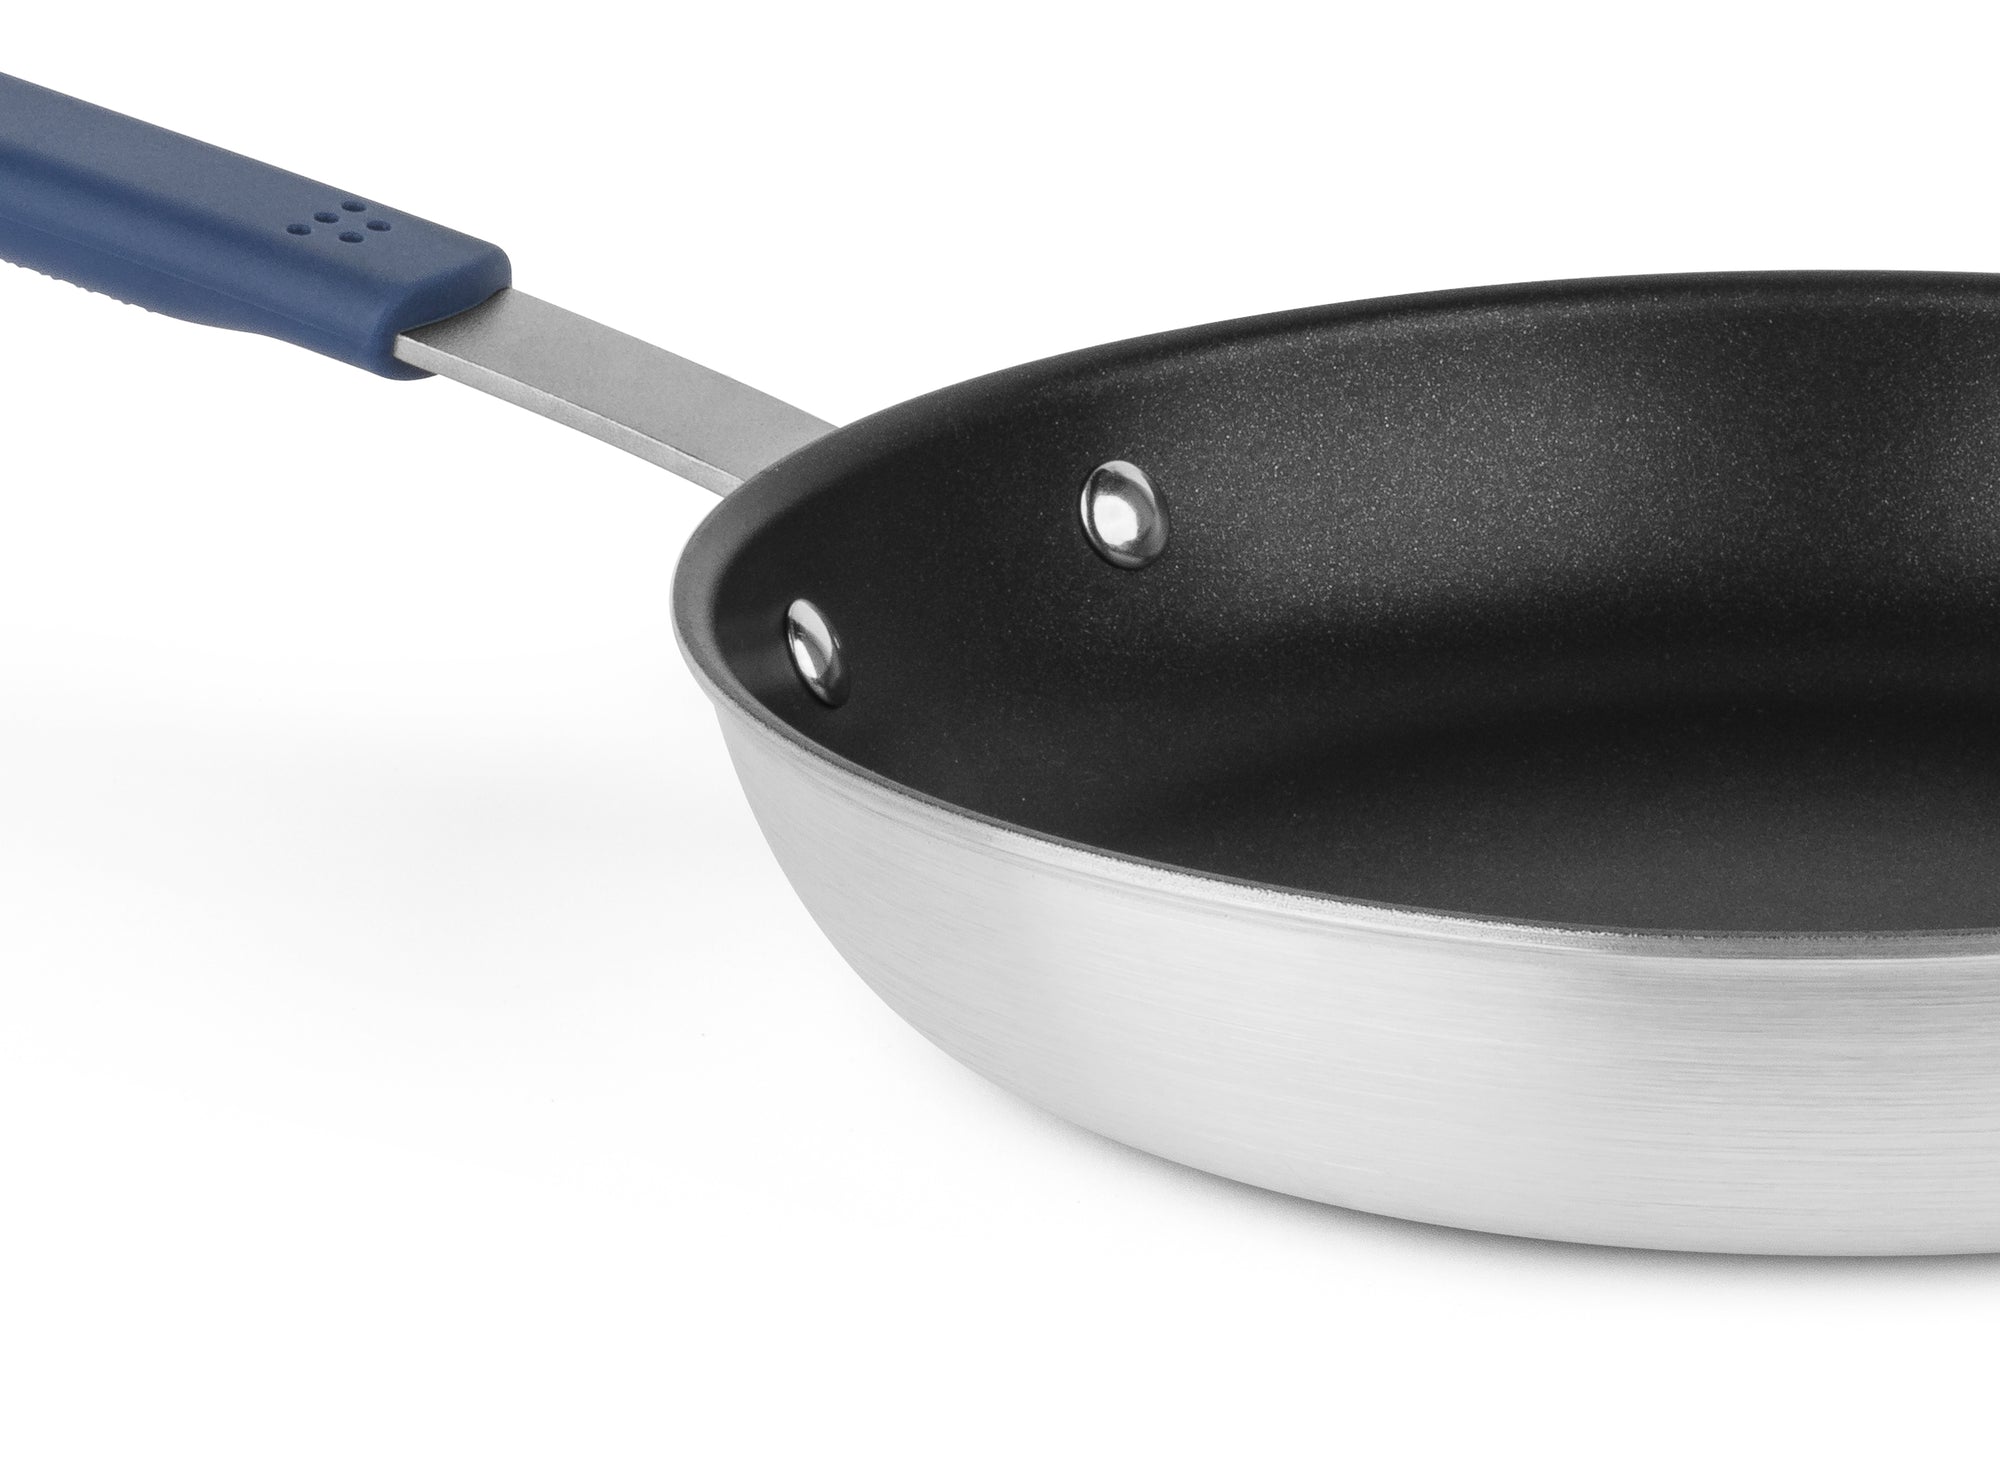 The 10 inch Misen Nonstick Pan comes with a silicone handle that stays cool to the touch.